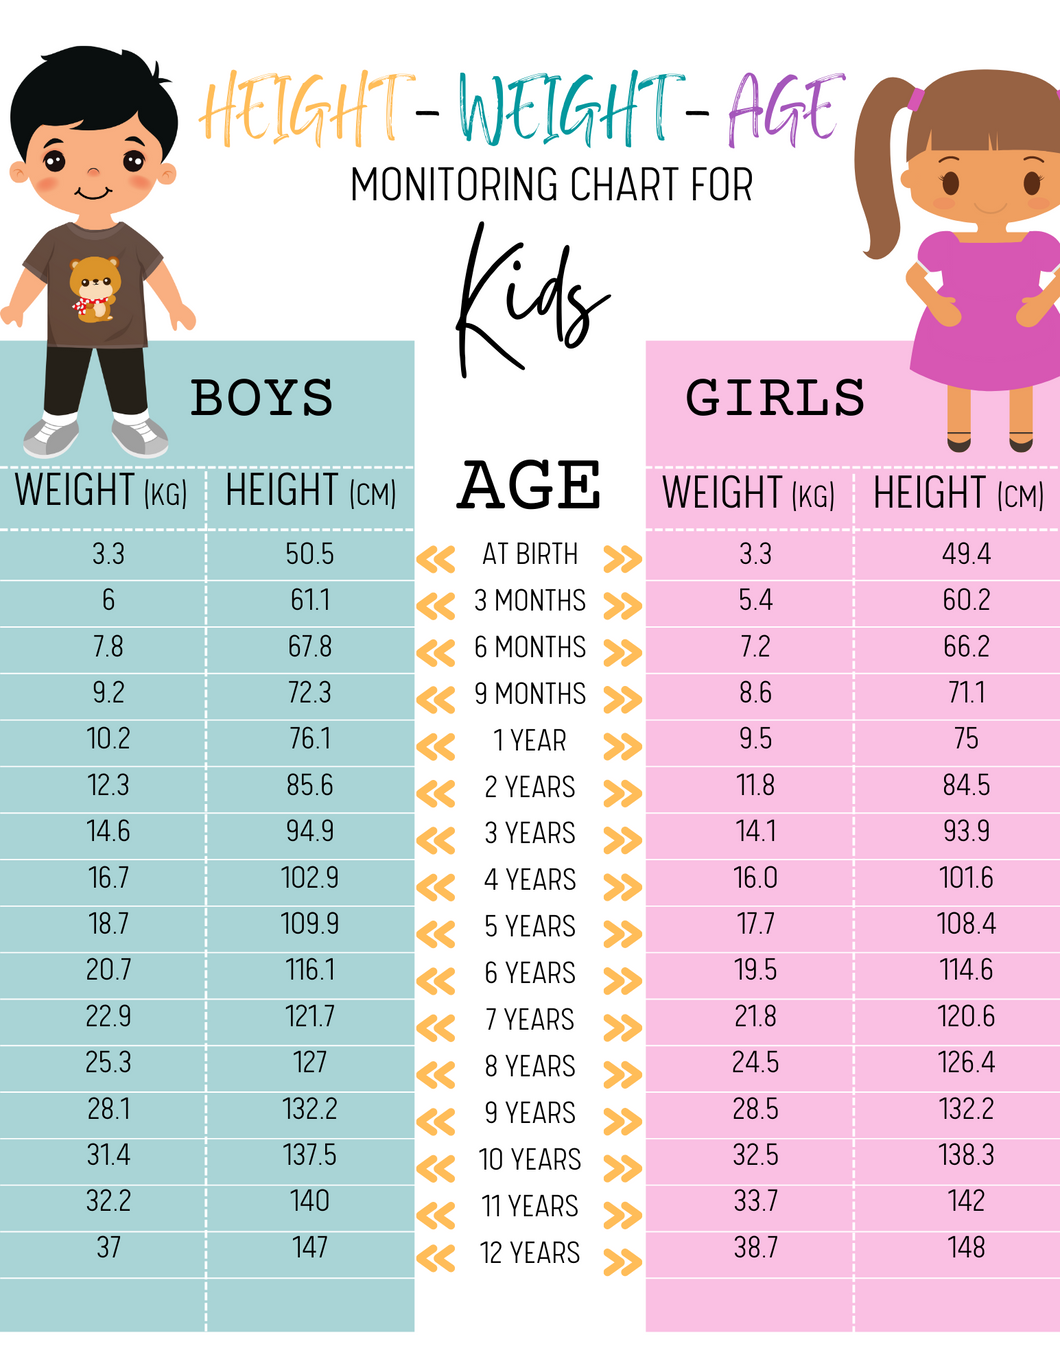 A chart of a child's height.
Product Name: Wondermom Printables Height/Weight/Age Monitoring Chart
Brand Name: Wondermom Printables